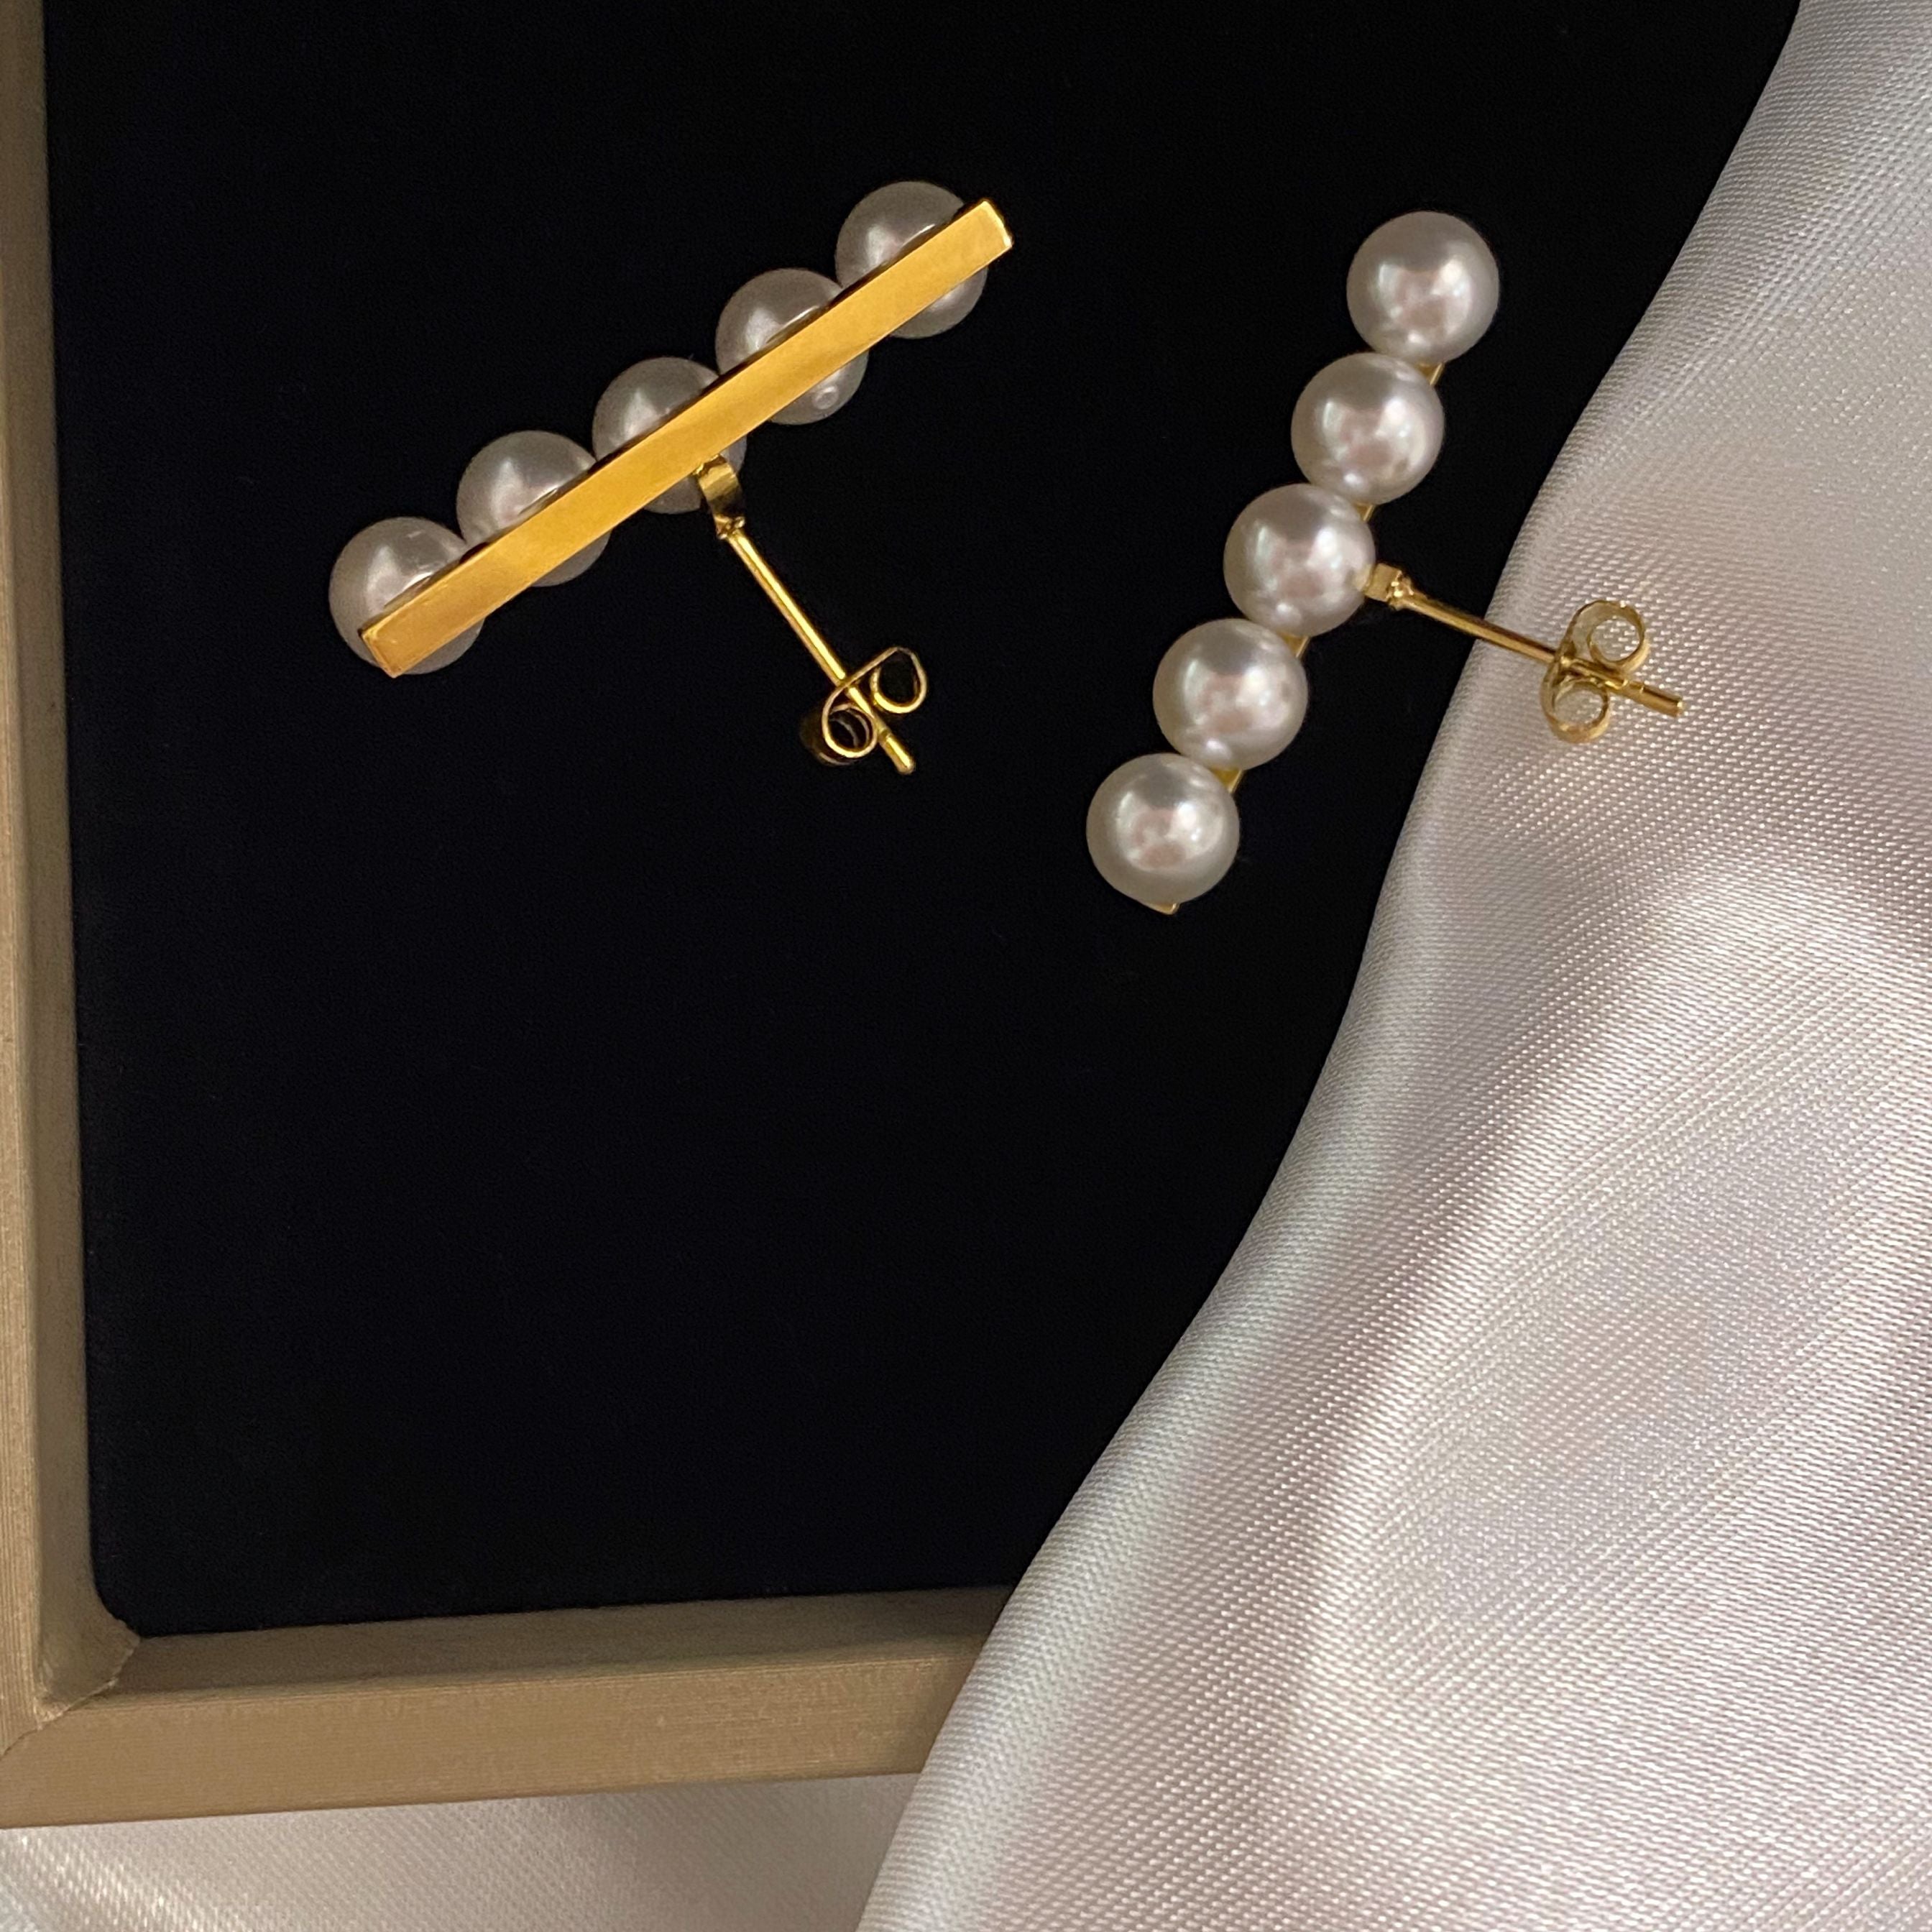 Handmade 18K Gold Plated w/ Pearl Earrings Valentine Day Gift Mother's Day